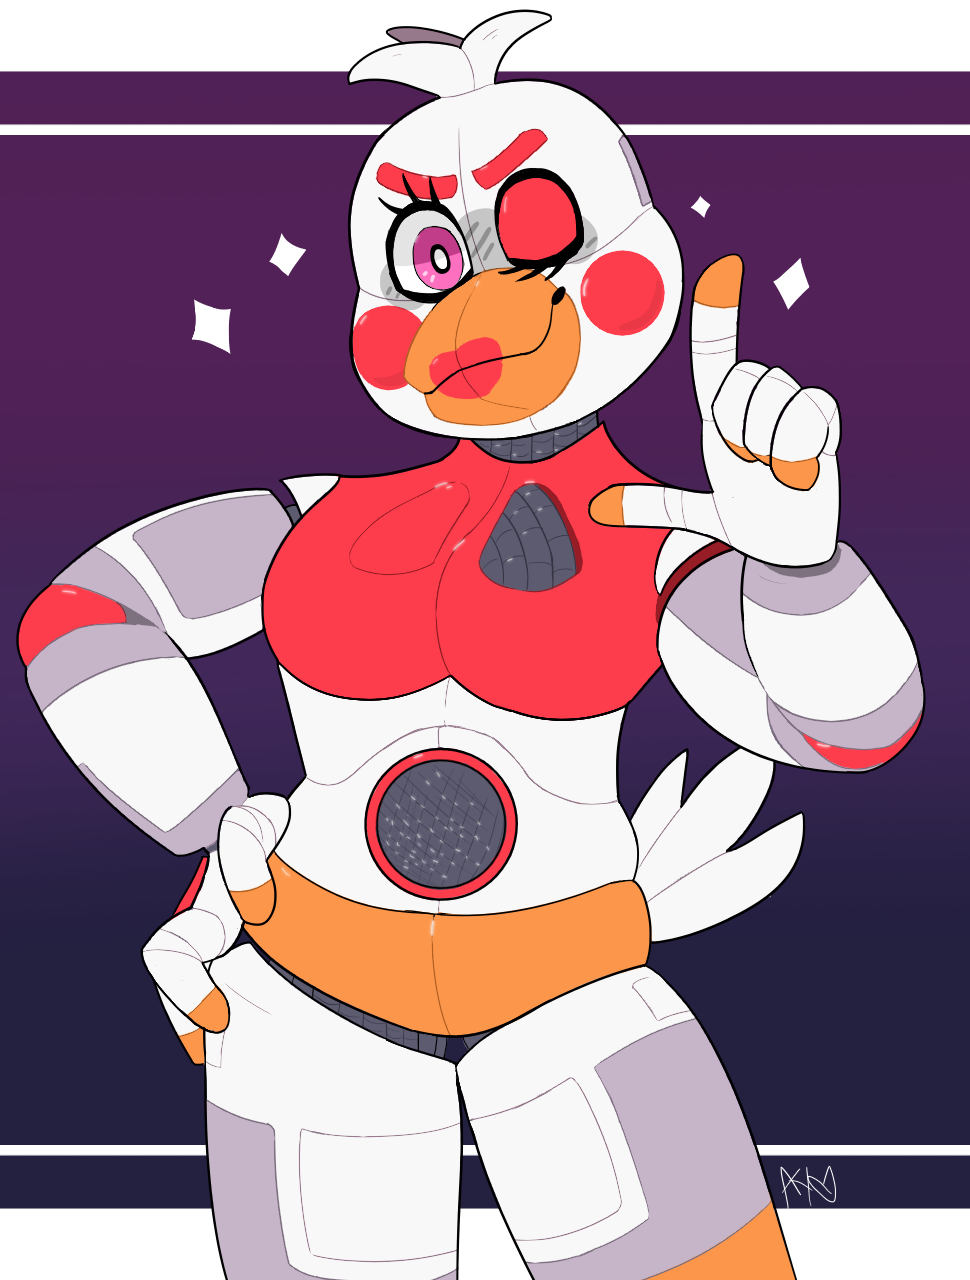 Pixilart - funtime chica by XcX